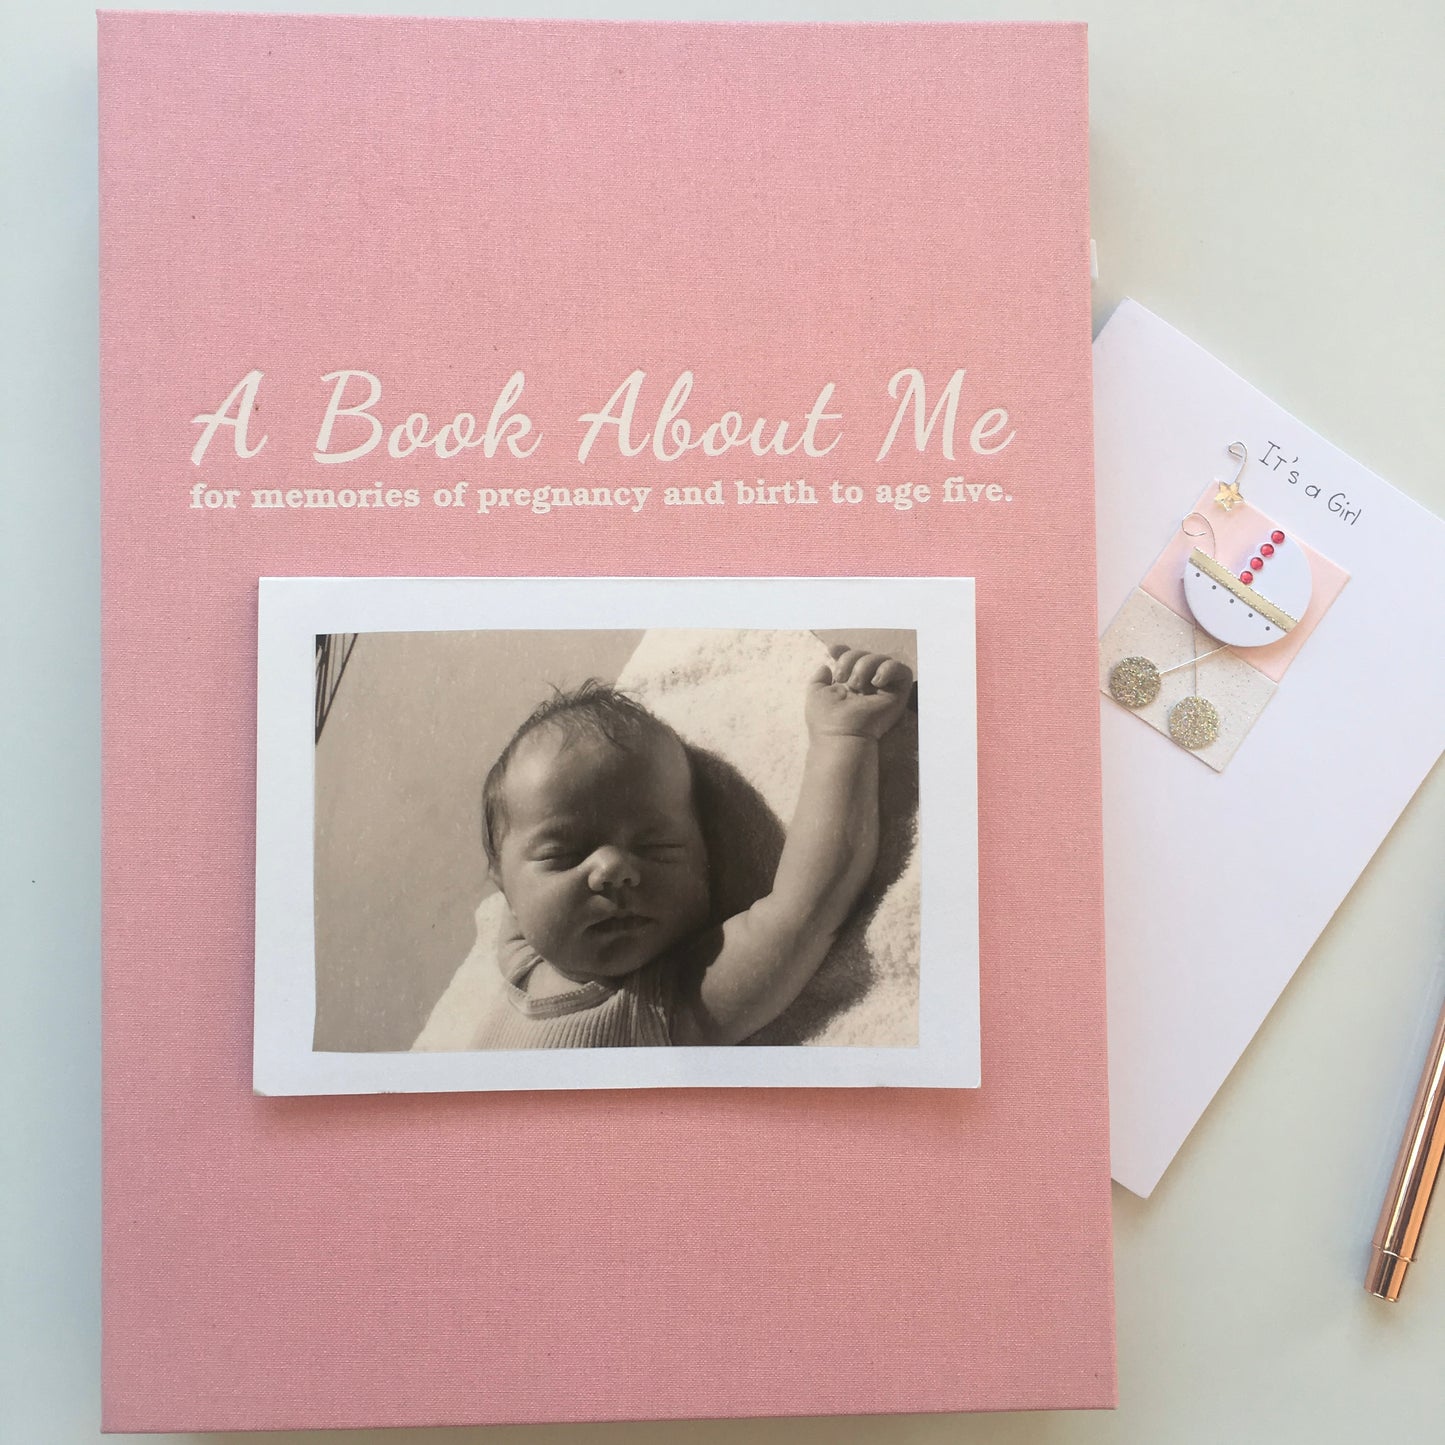 A Book About Me - for memories of pregnancy and birth to age five.